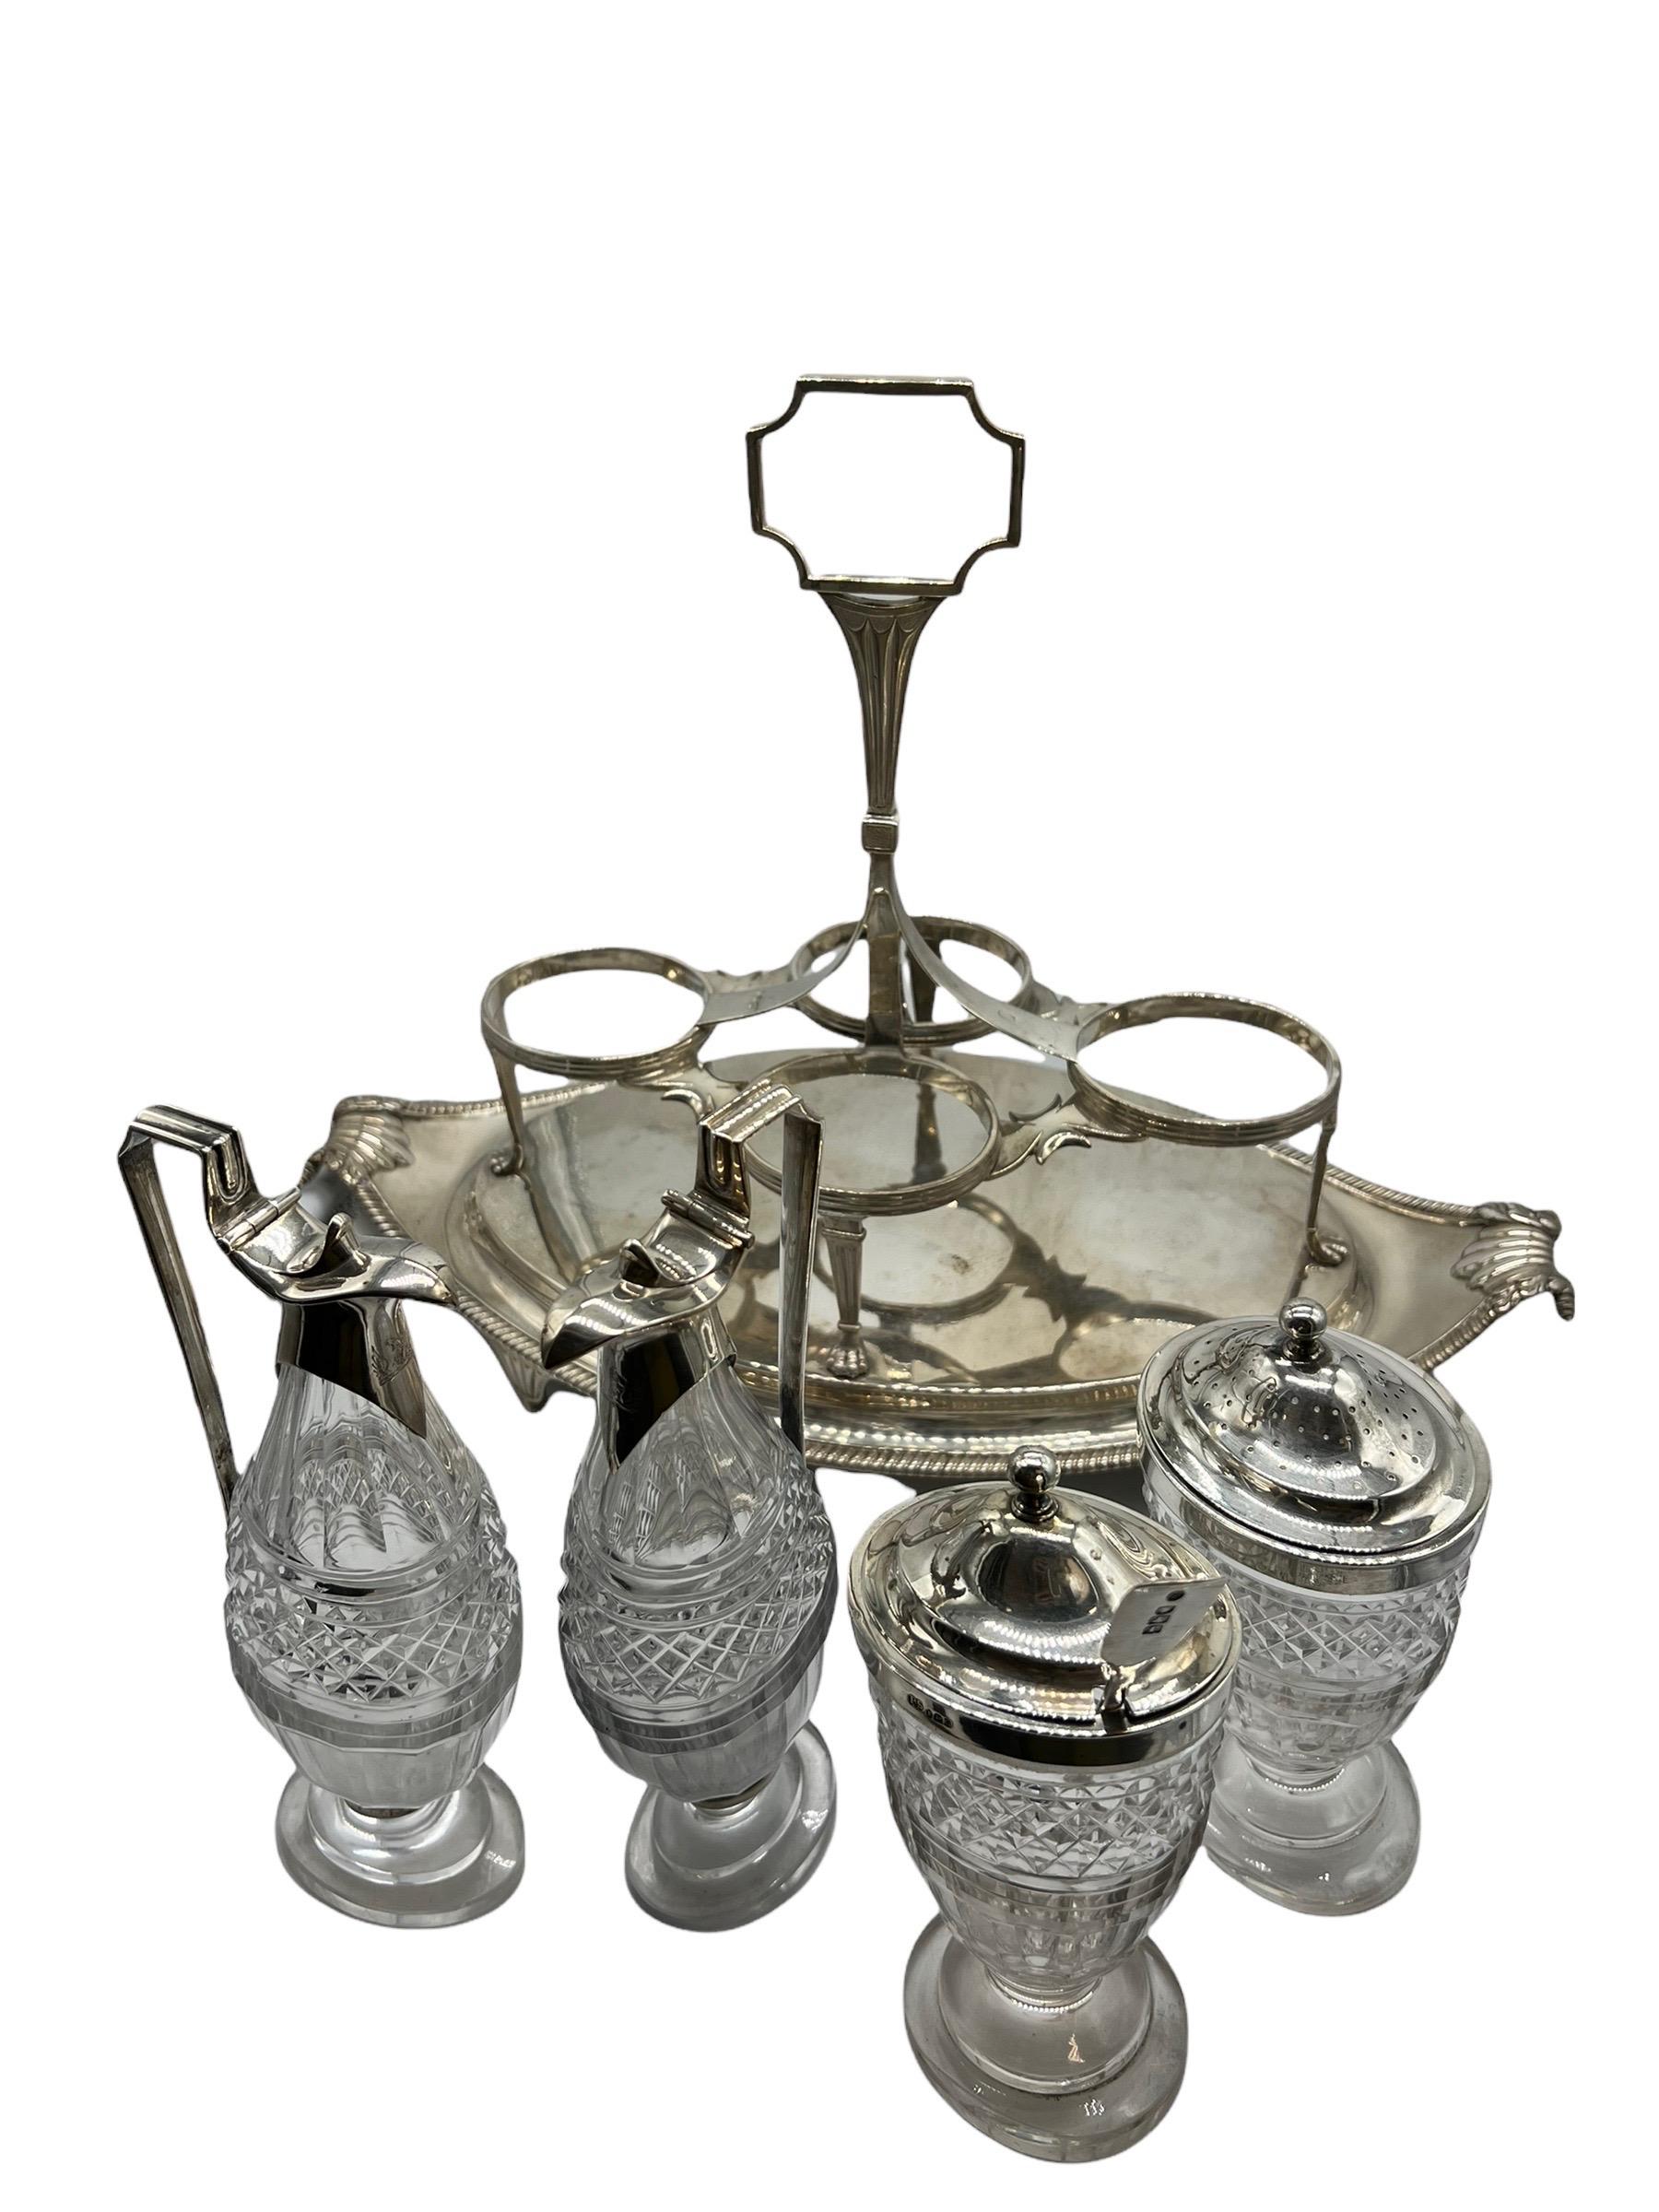 Sterling Silver and Cut-Glass Cruet Set by Paul Storr, Early 1800s For Sale 10